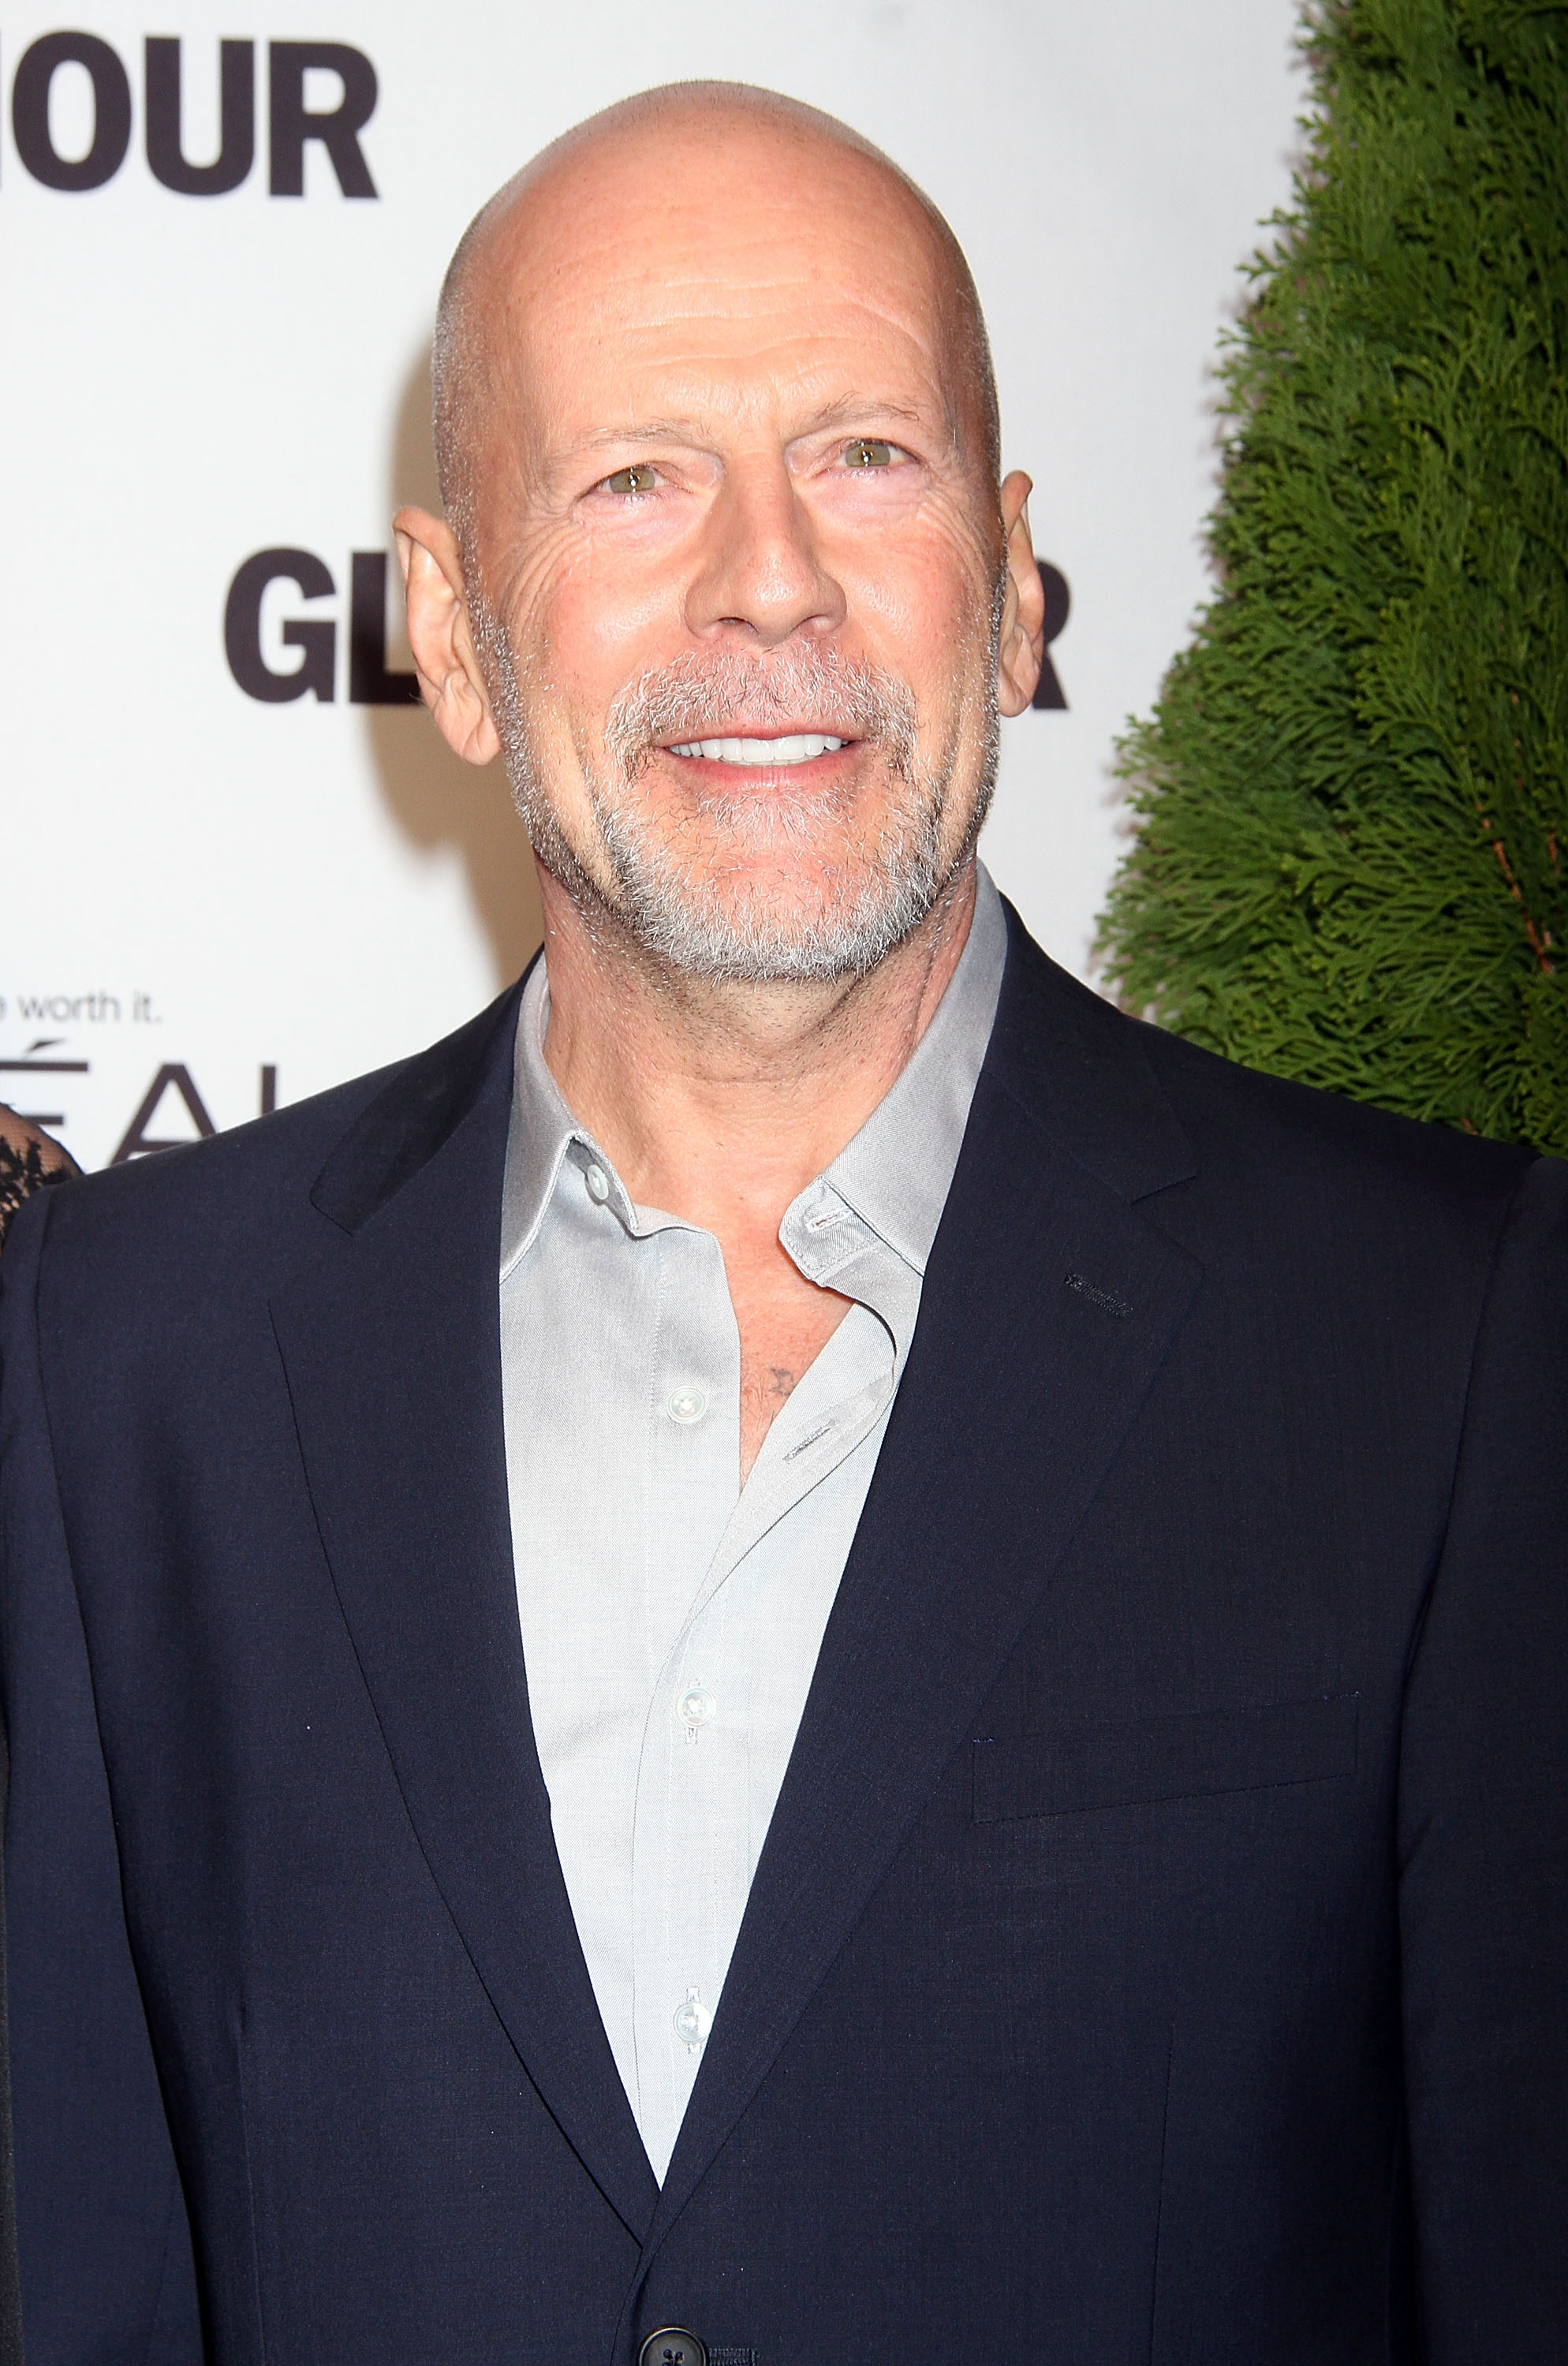 Bruce Willis at the Glamour Women Of The Year Awards in New York City on November 10, 2014 | Source: Getty Images